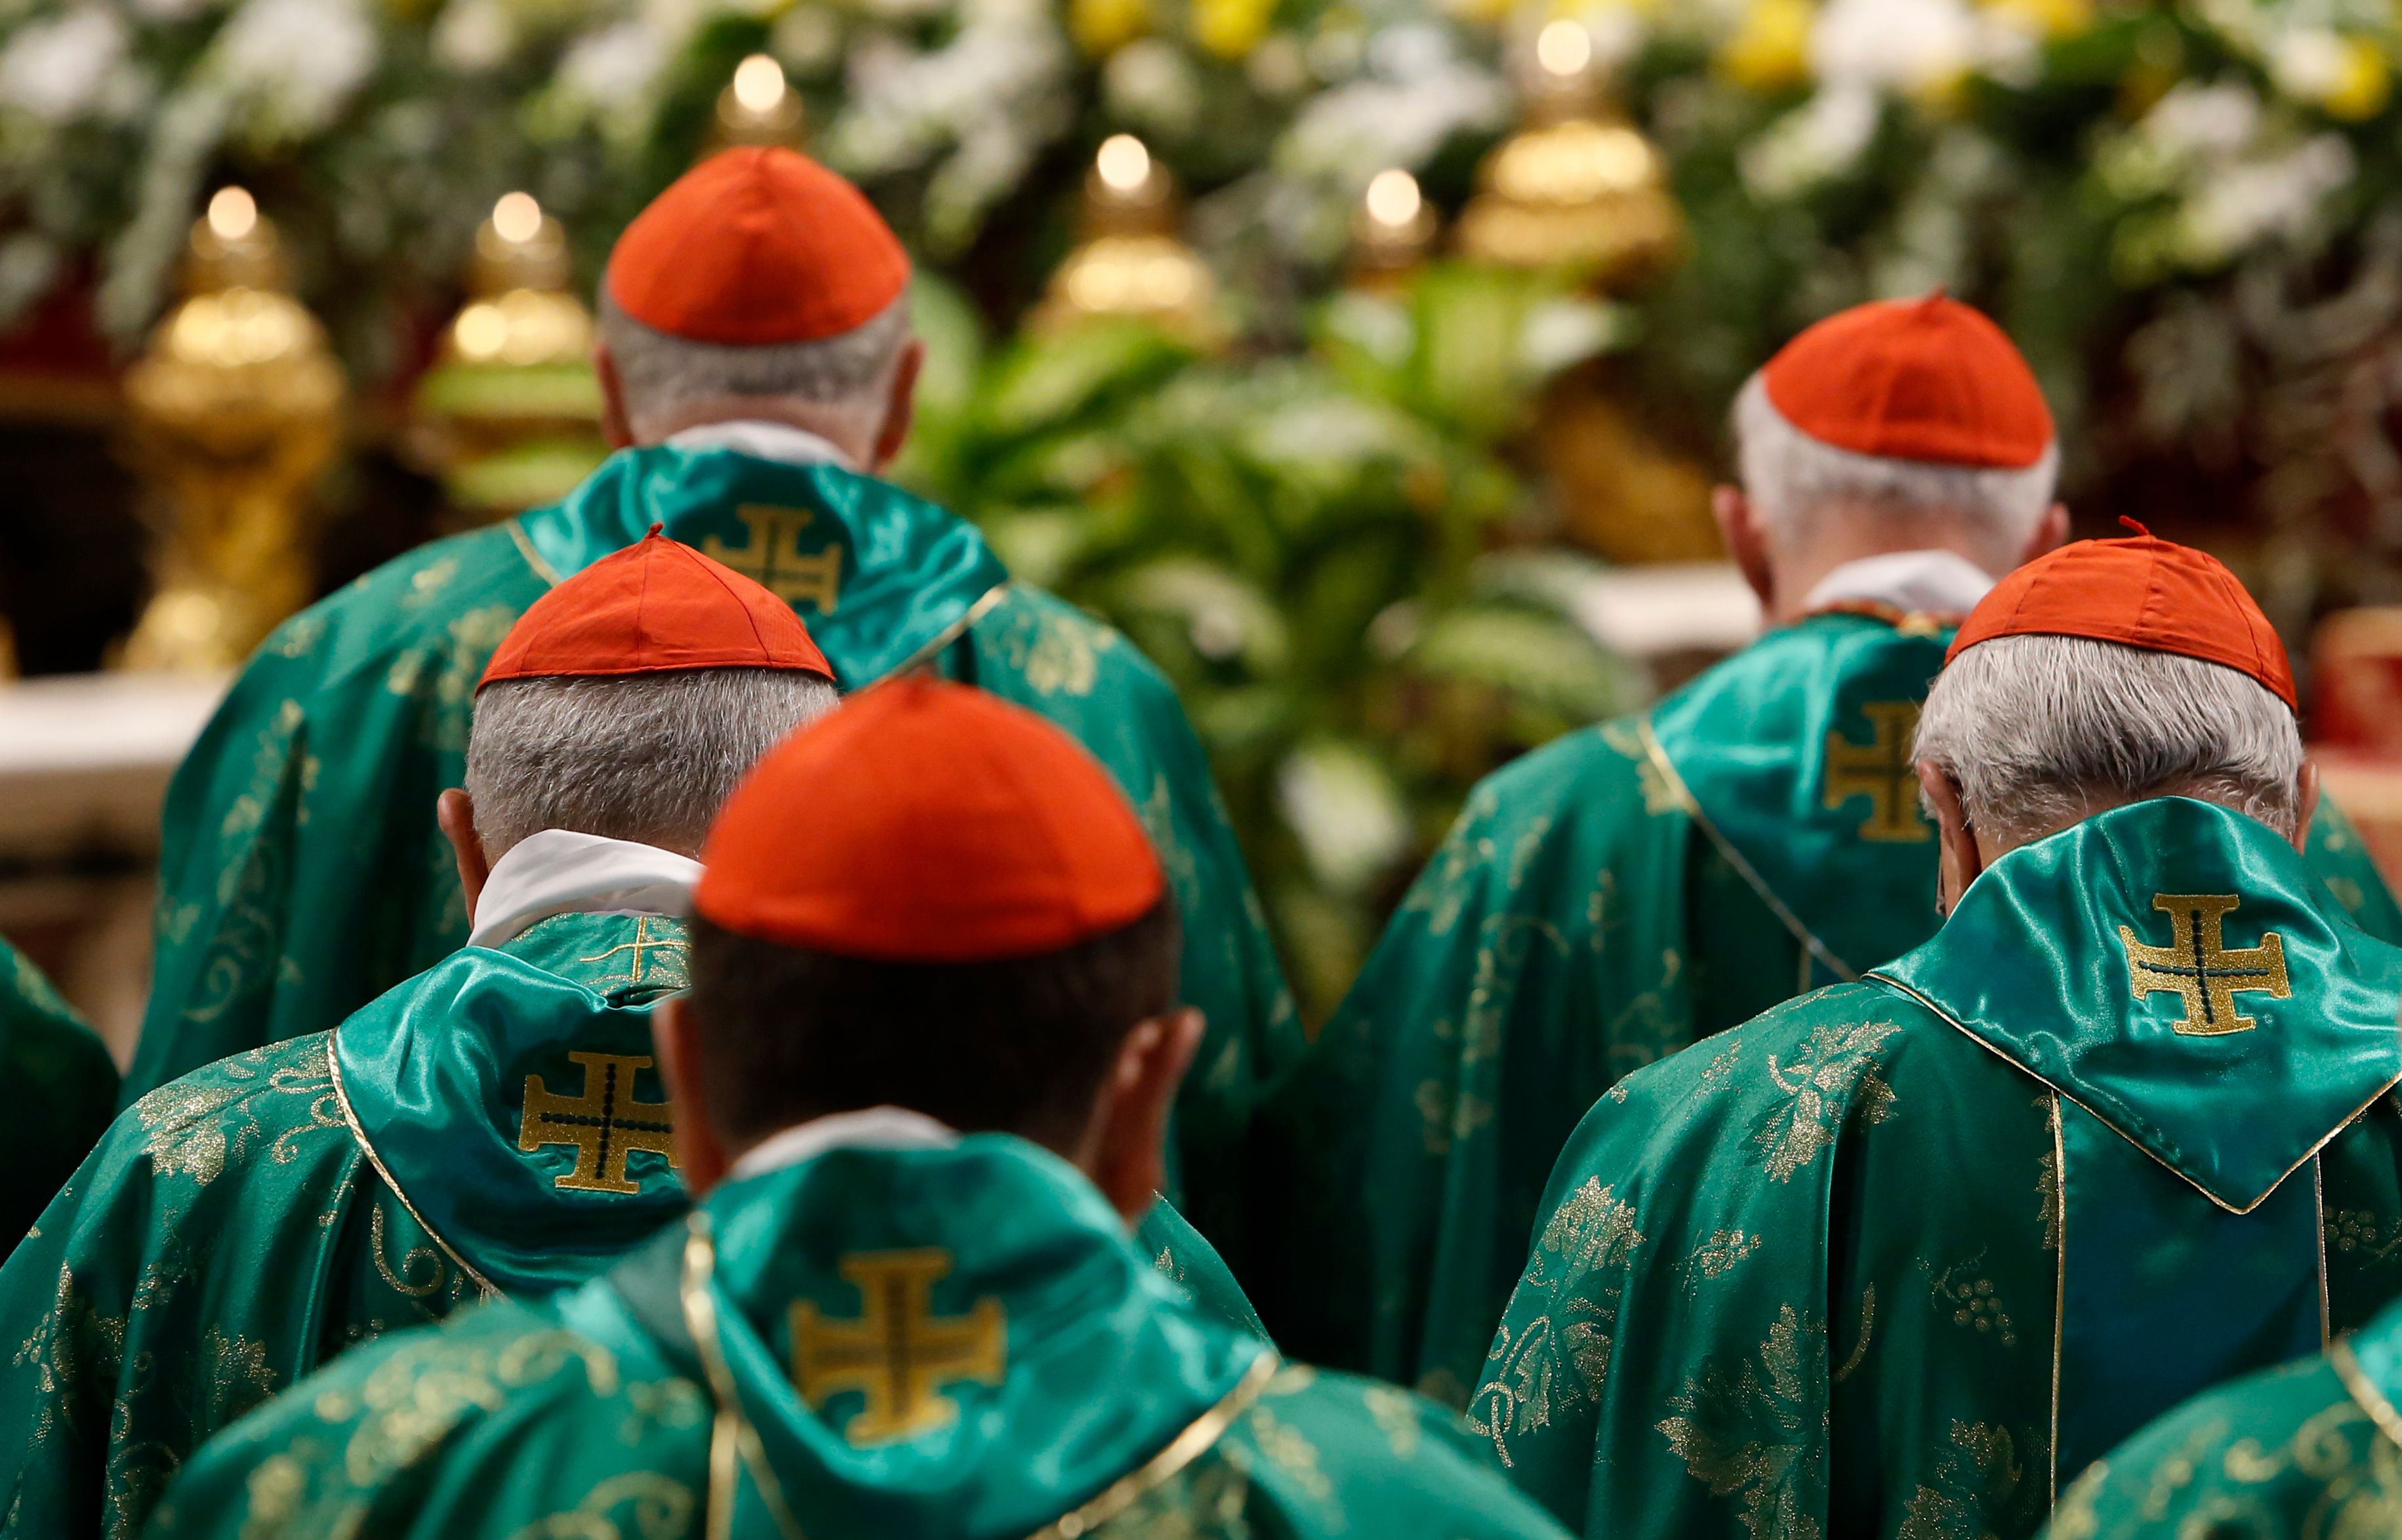 Read Pope Francis’ response to the dubia presented to him by 5 cardinals